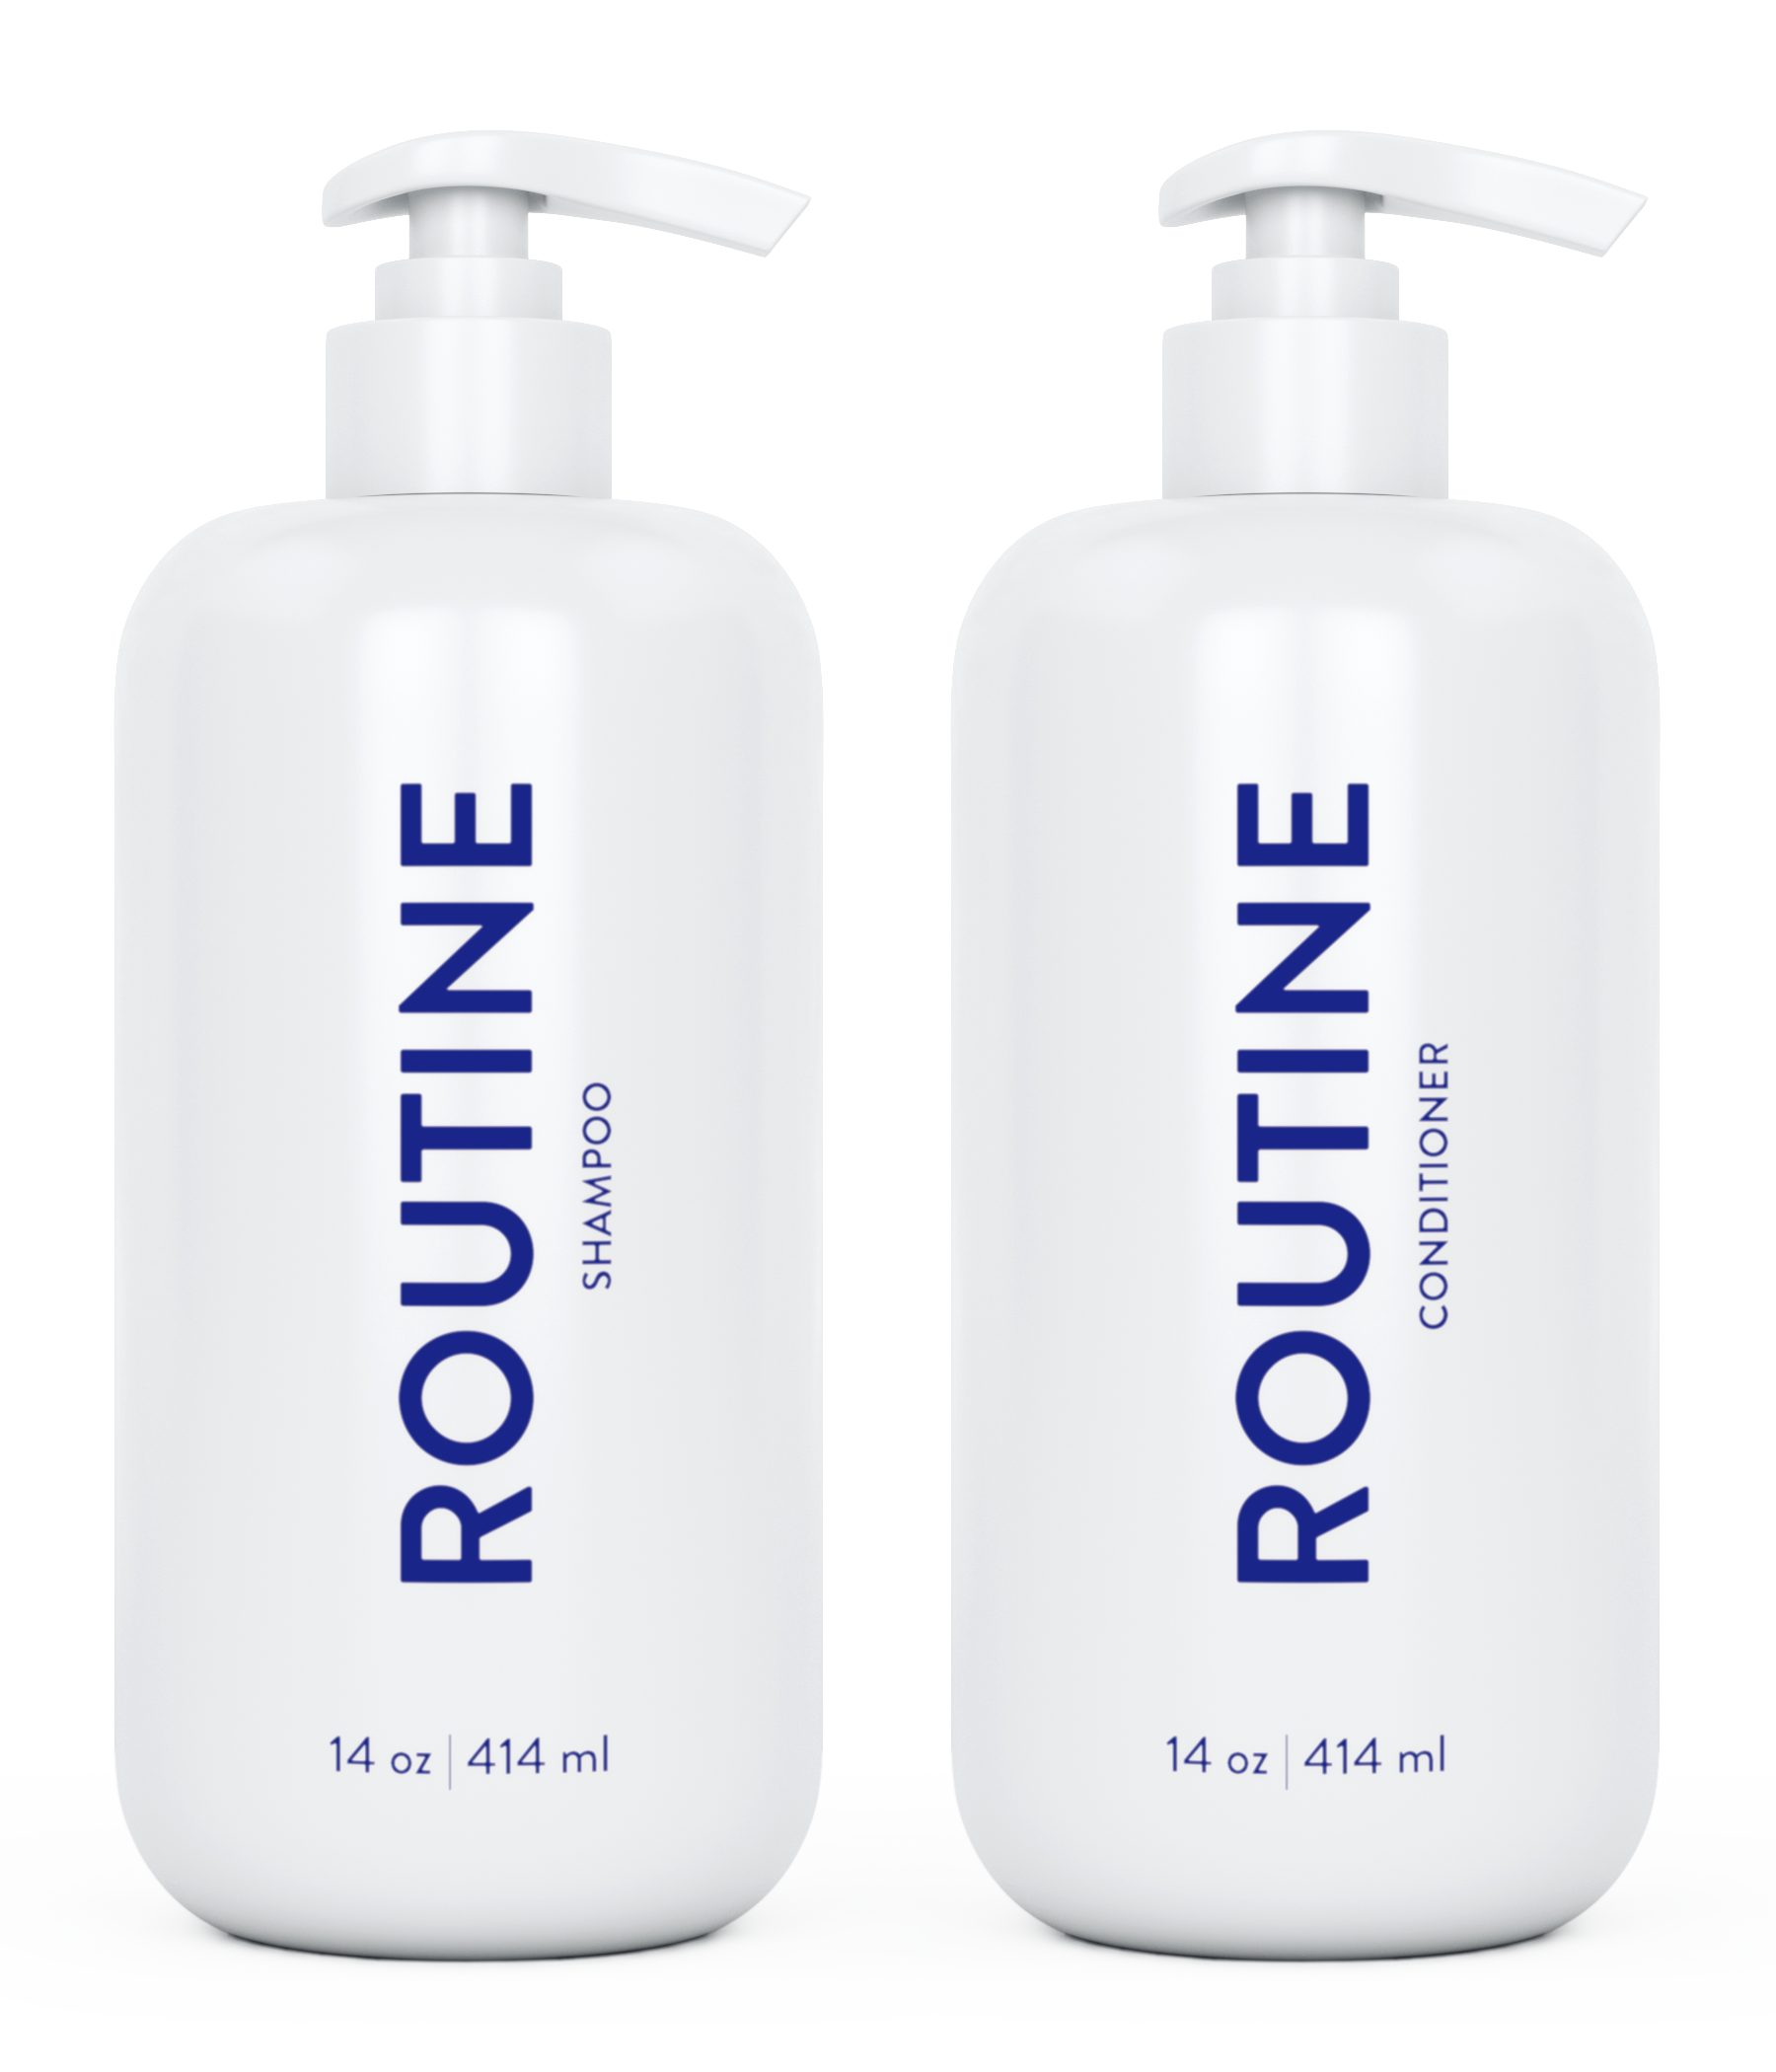 Routine Shampoo and Conditioner are scientifically formulated to end bad hair days by strengthening hair and reducing breakage